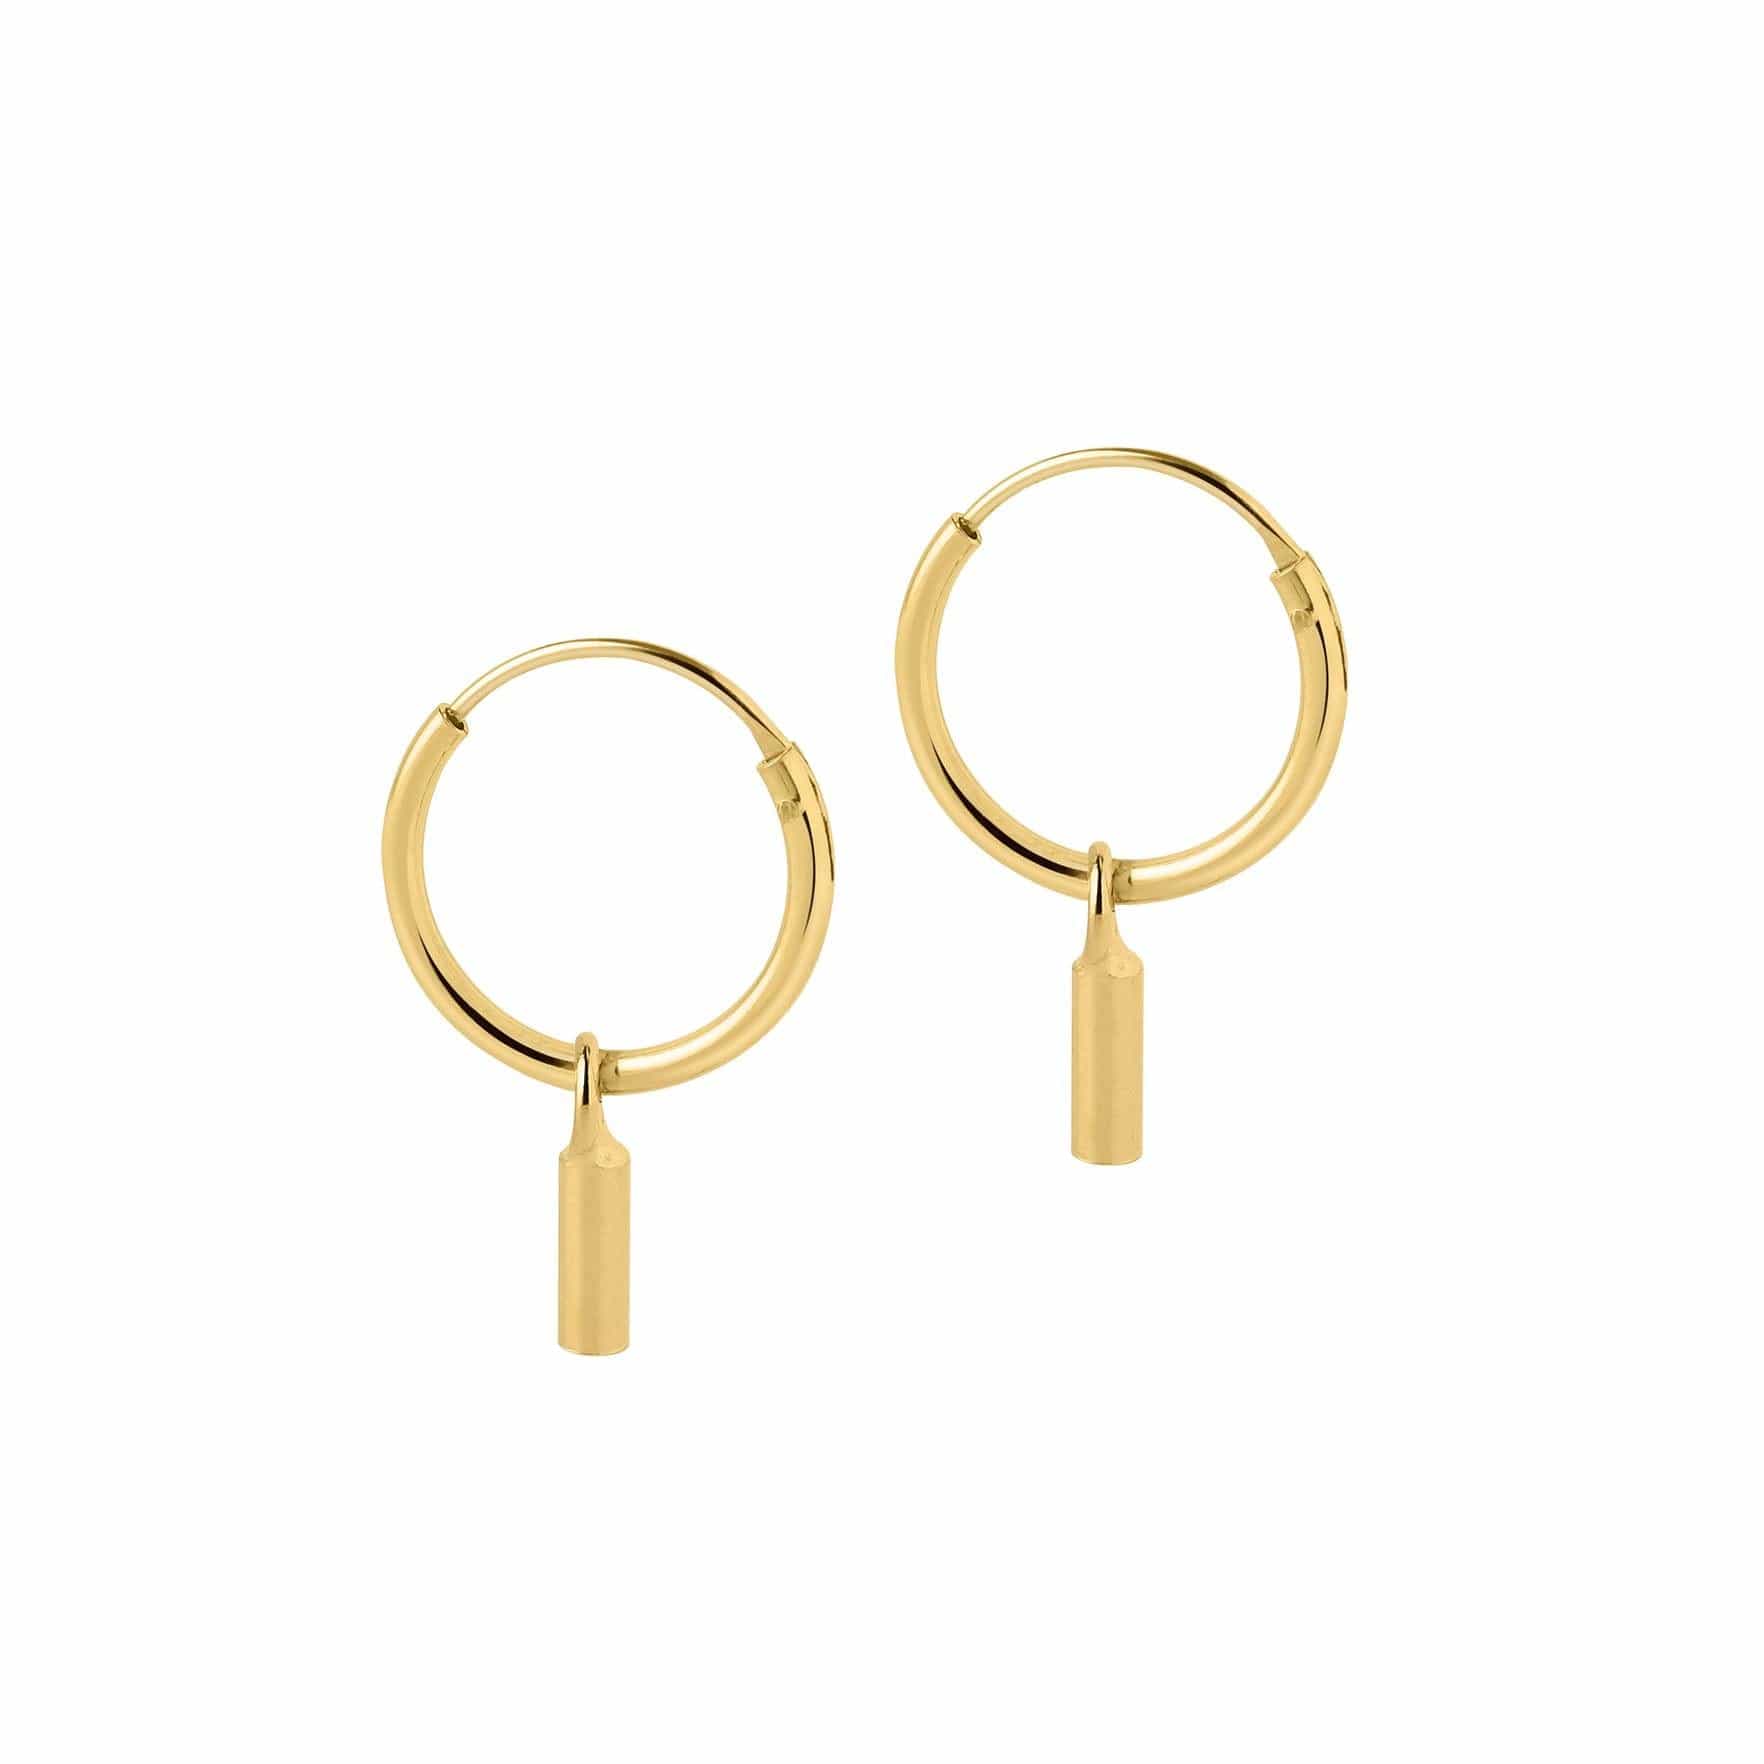 Hoop earrings gold plated with a rod pendant 12mm